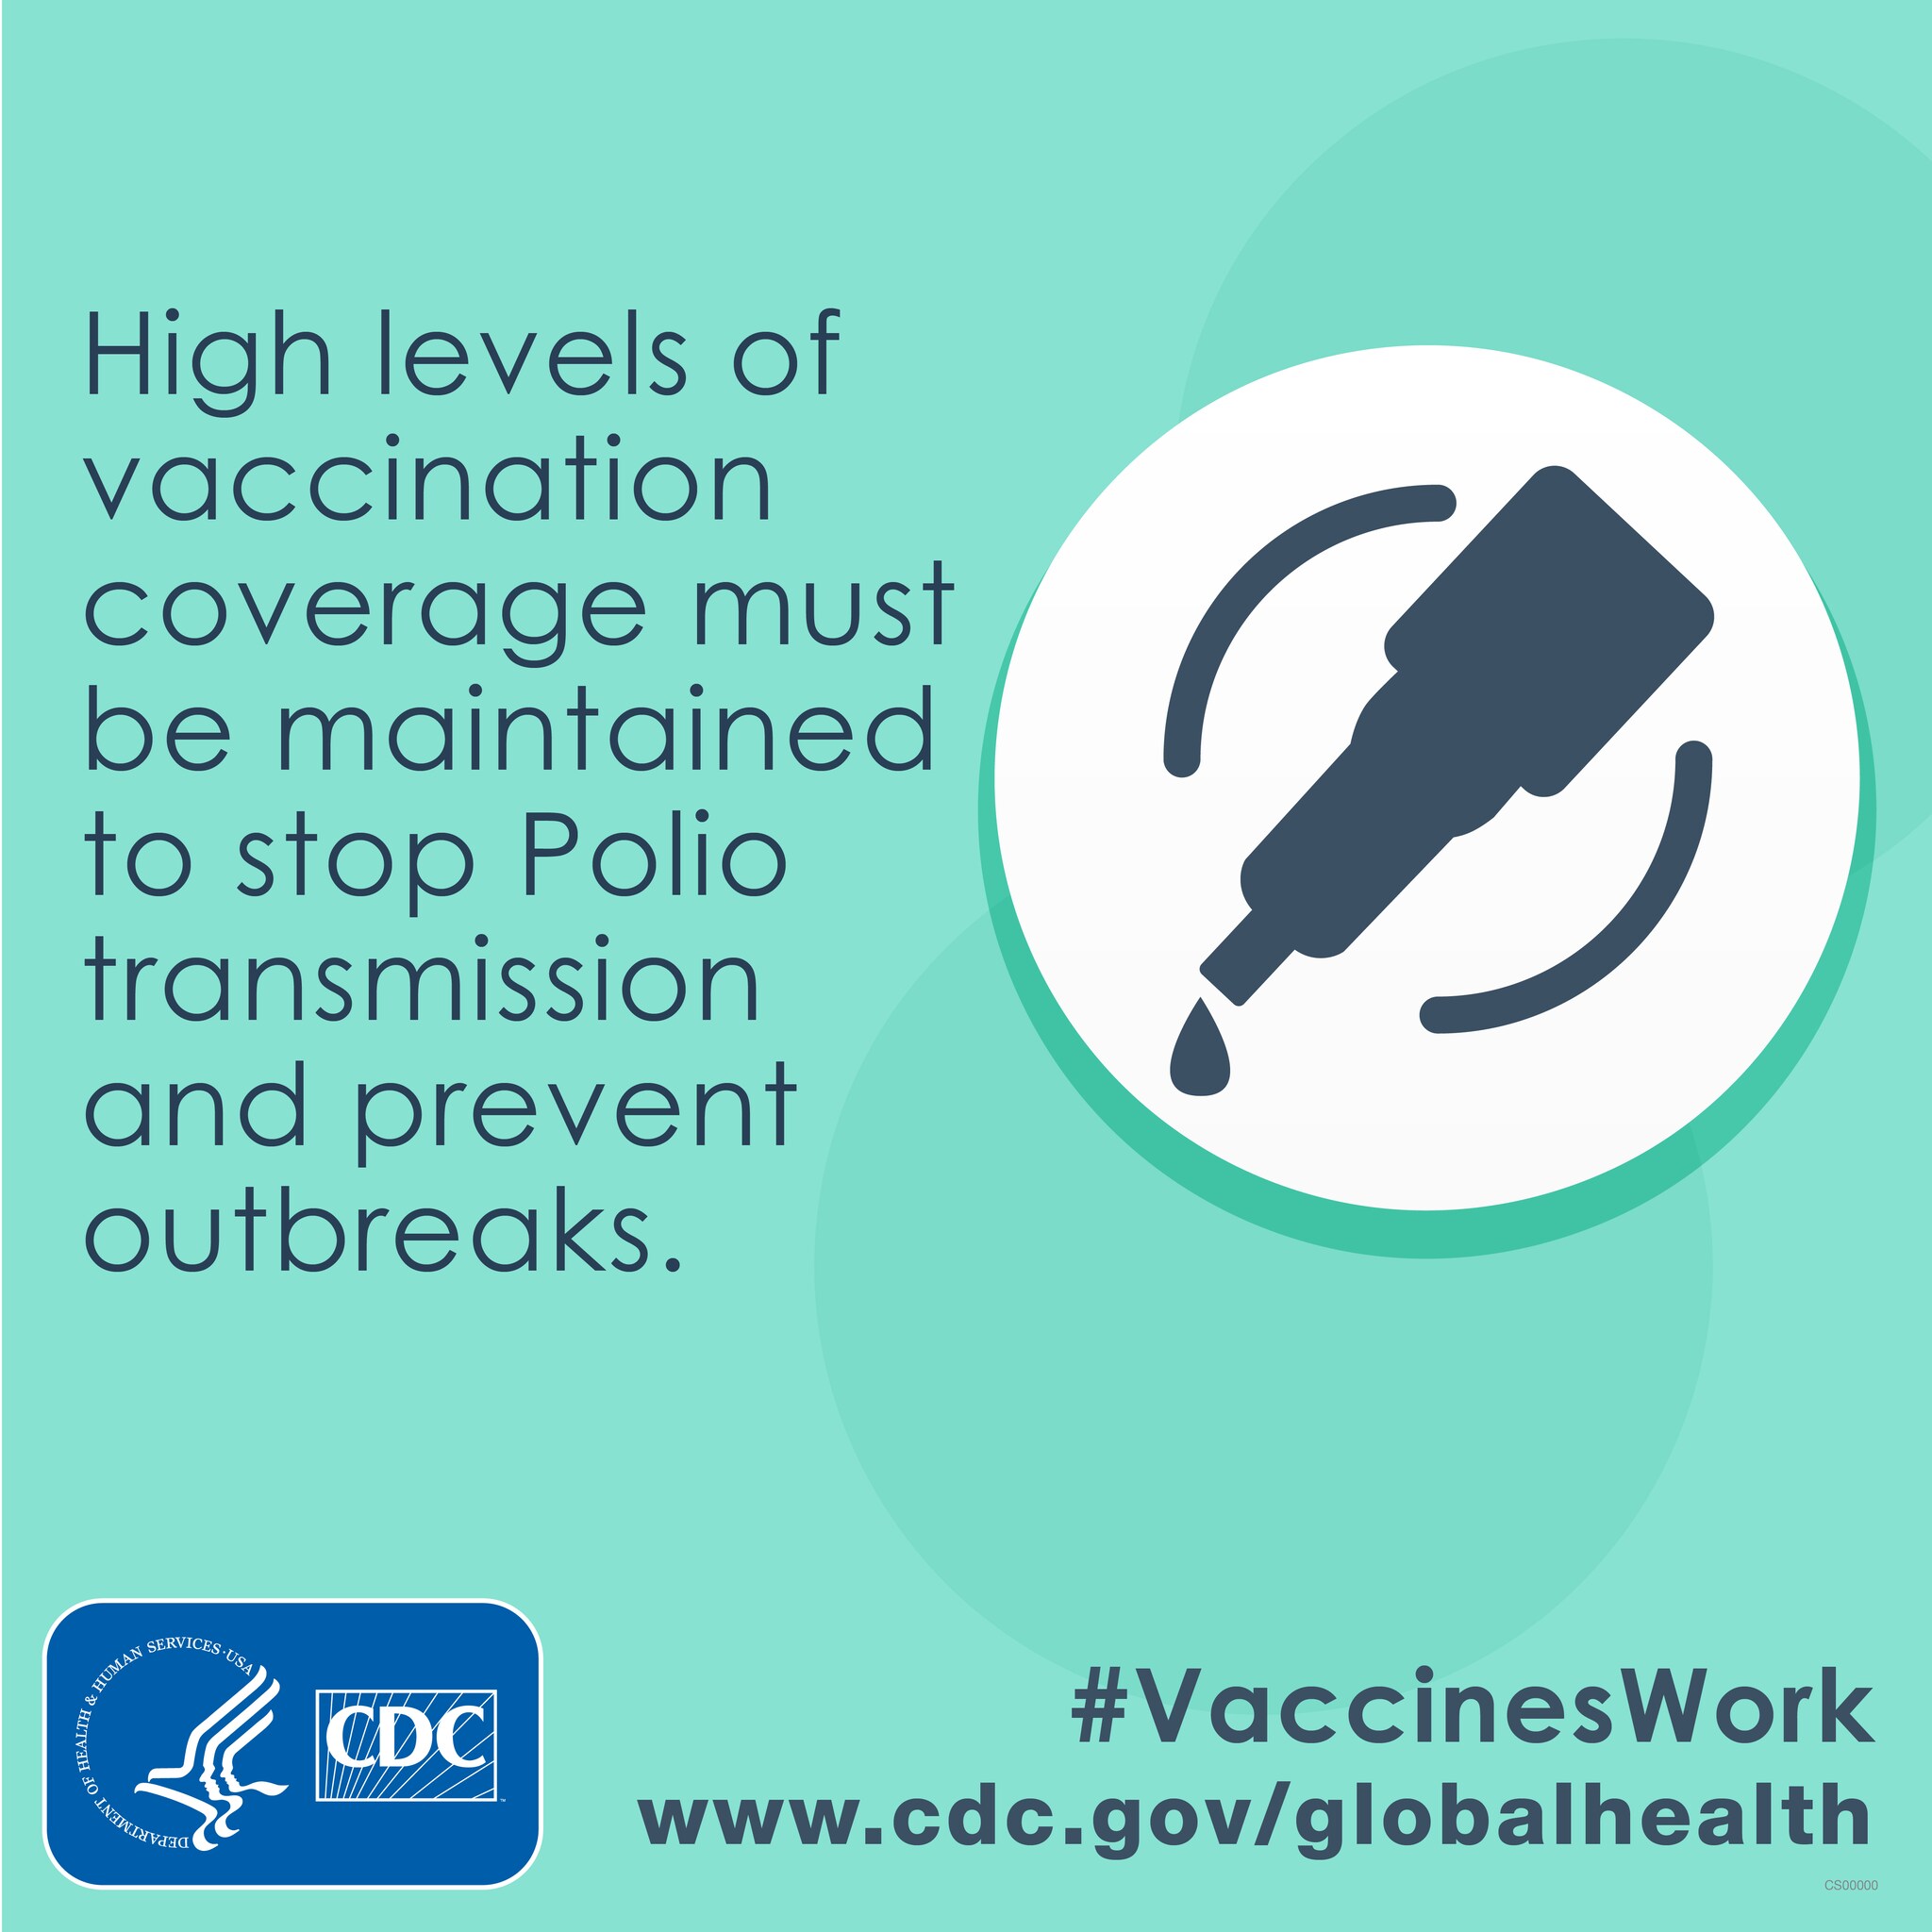 High levels of vaccination coverage must be maintained to stop polio transmission & prevent outbreaks.